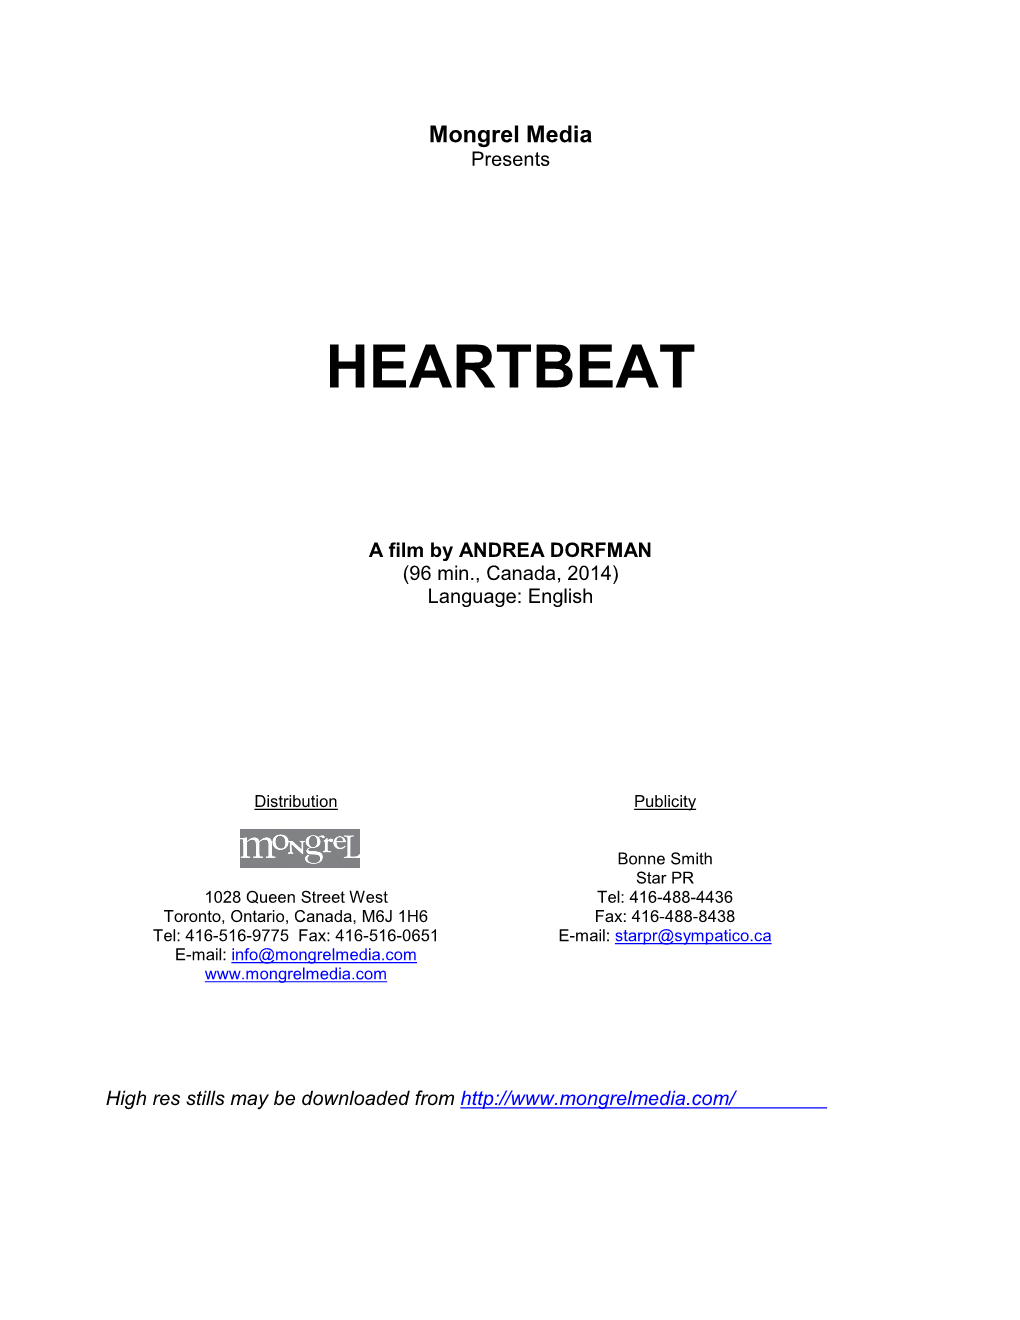 Heartbeat Press Kit (Pages)